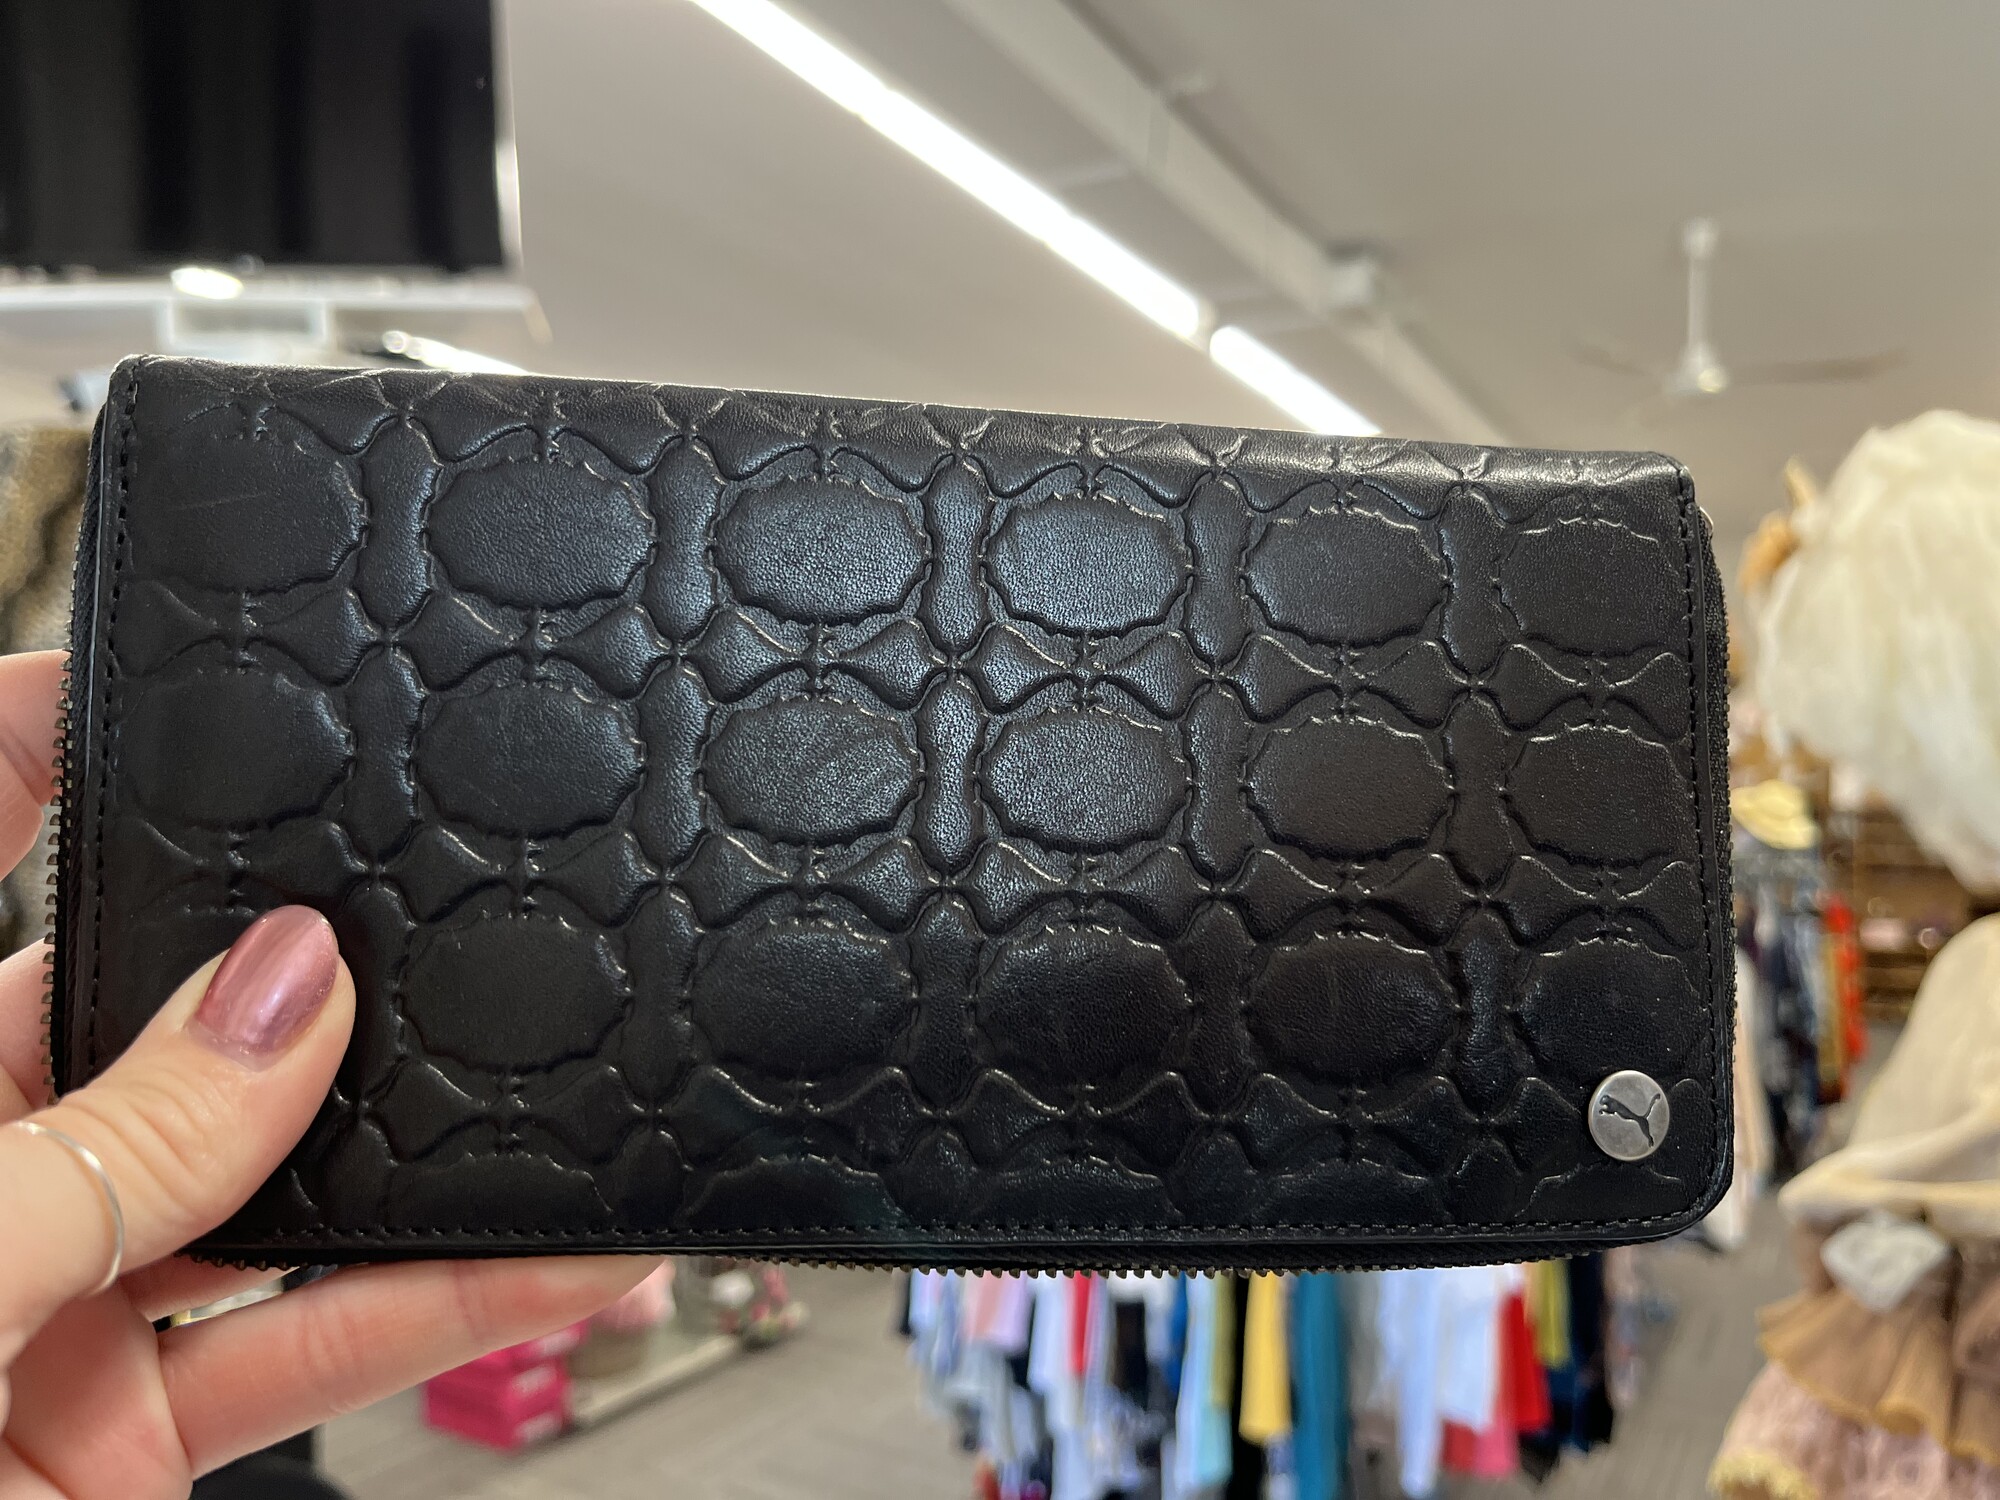 Leather Zip Wallet, Black with Pink interior zip pouch in Excellent preloved condition!